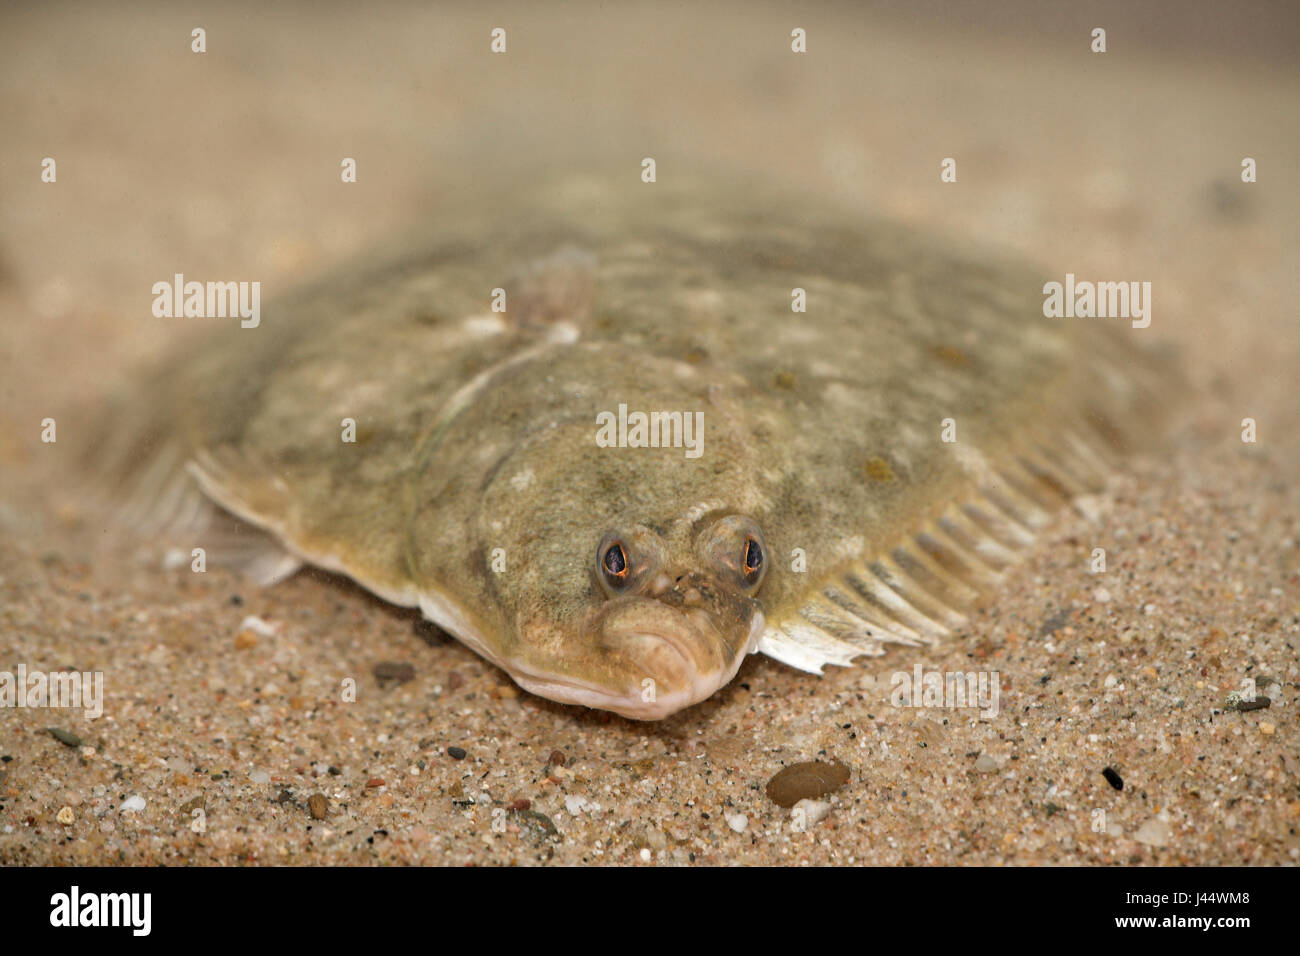 frontal picture of a flounder on sand Stock Photo